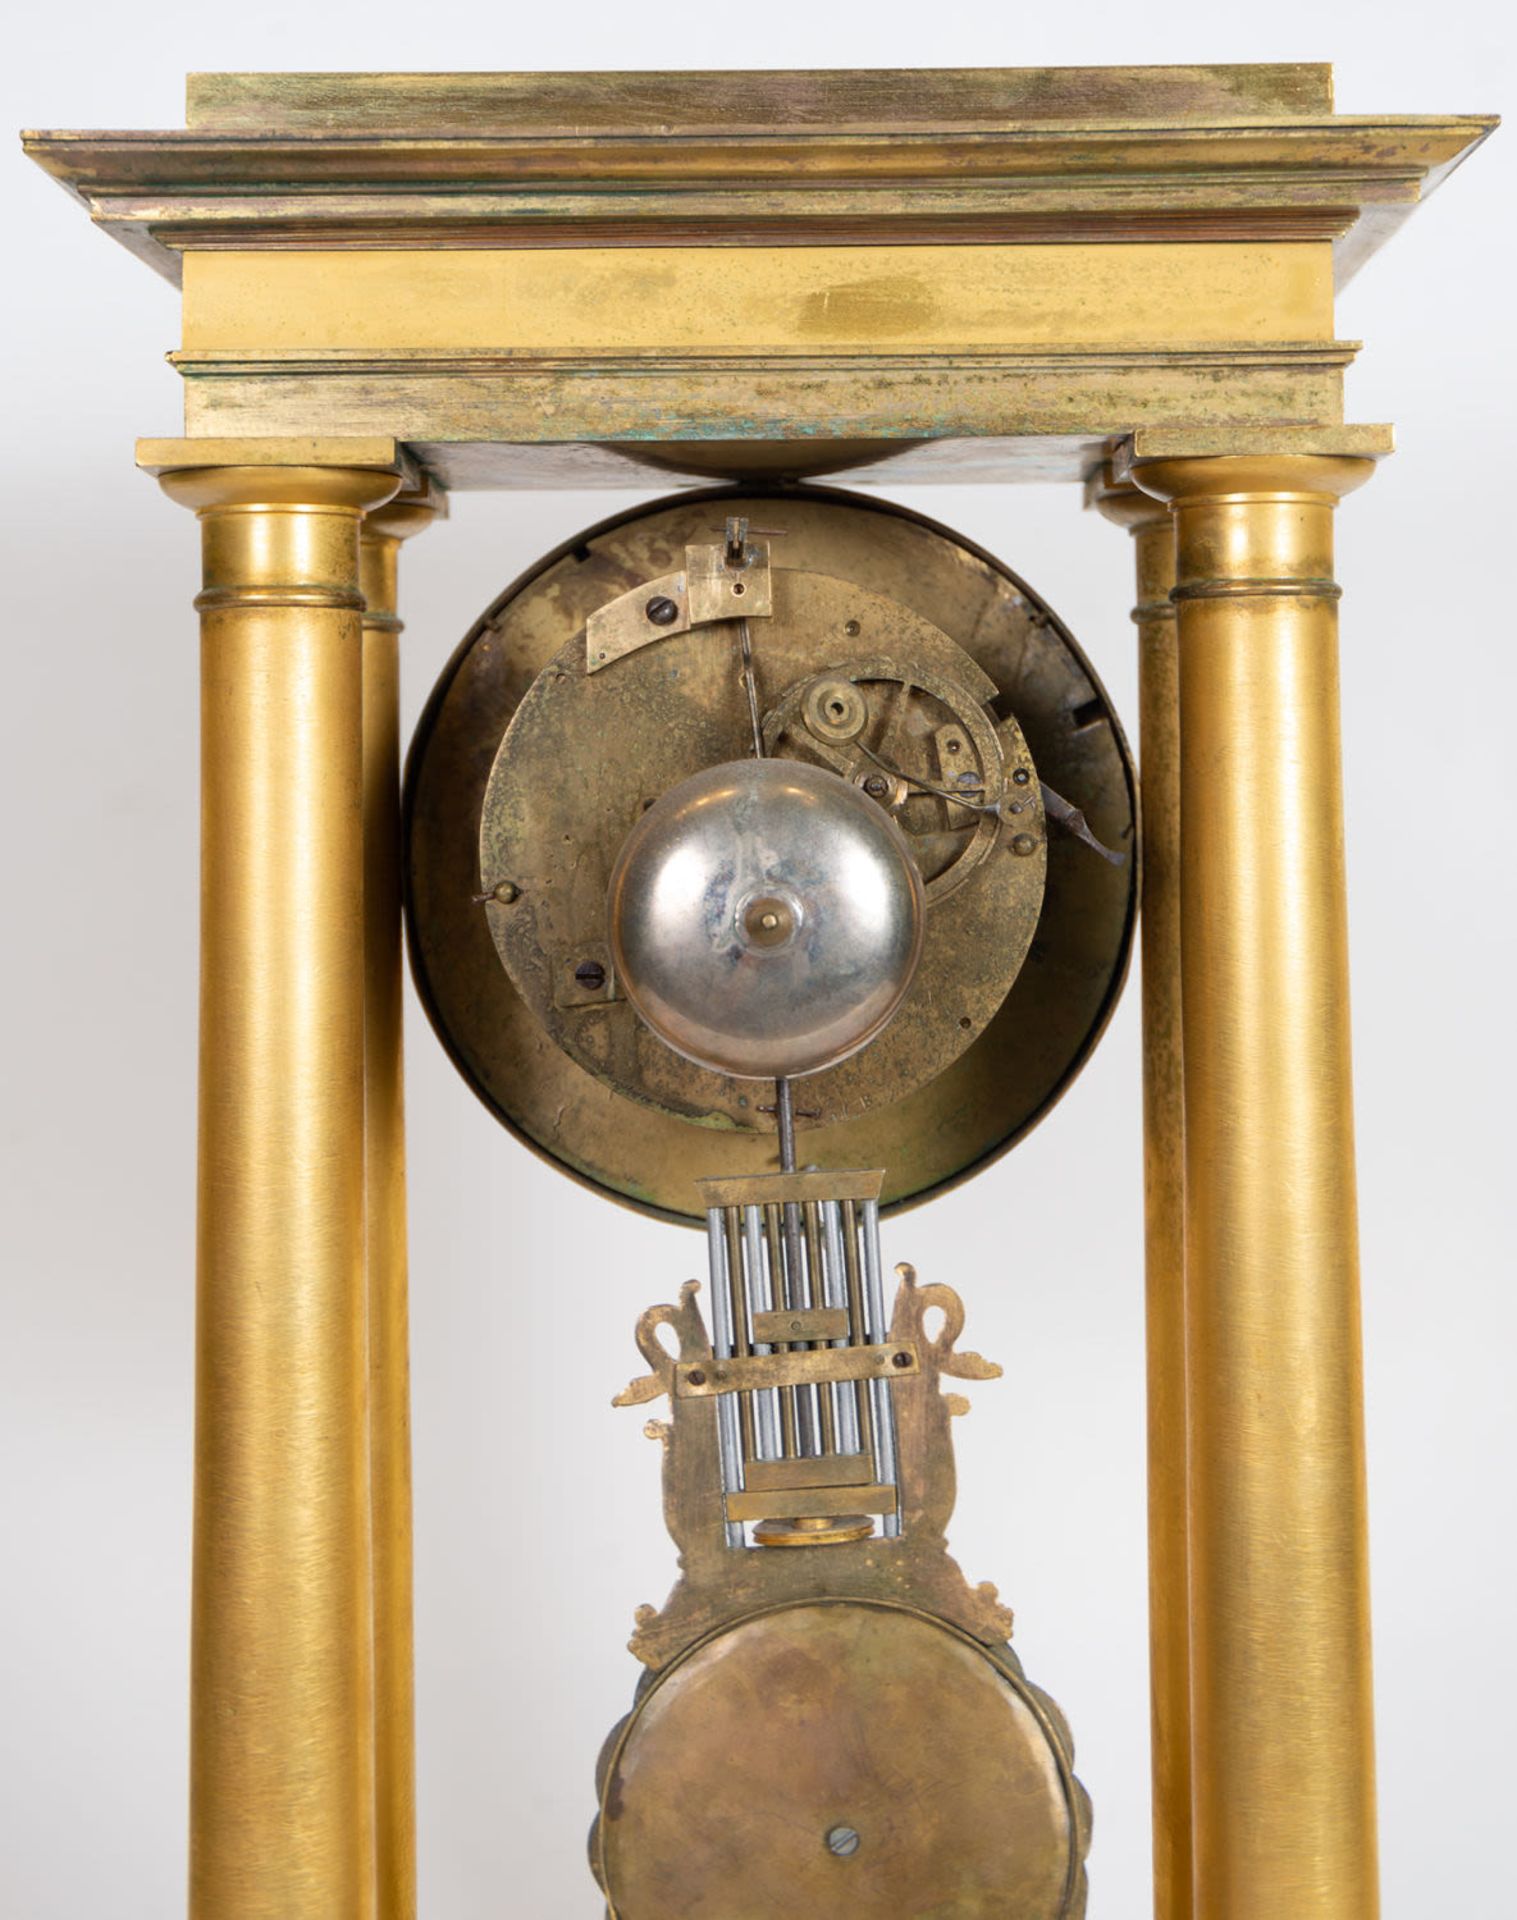 Large Bronze Clock in the shape of a Shrine with columns, French school of the 19th century - Image 5 of 5